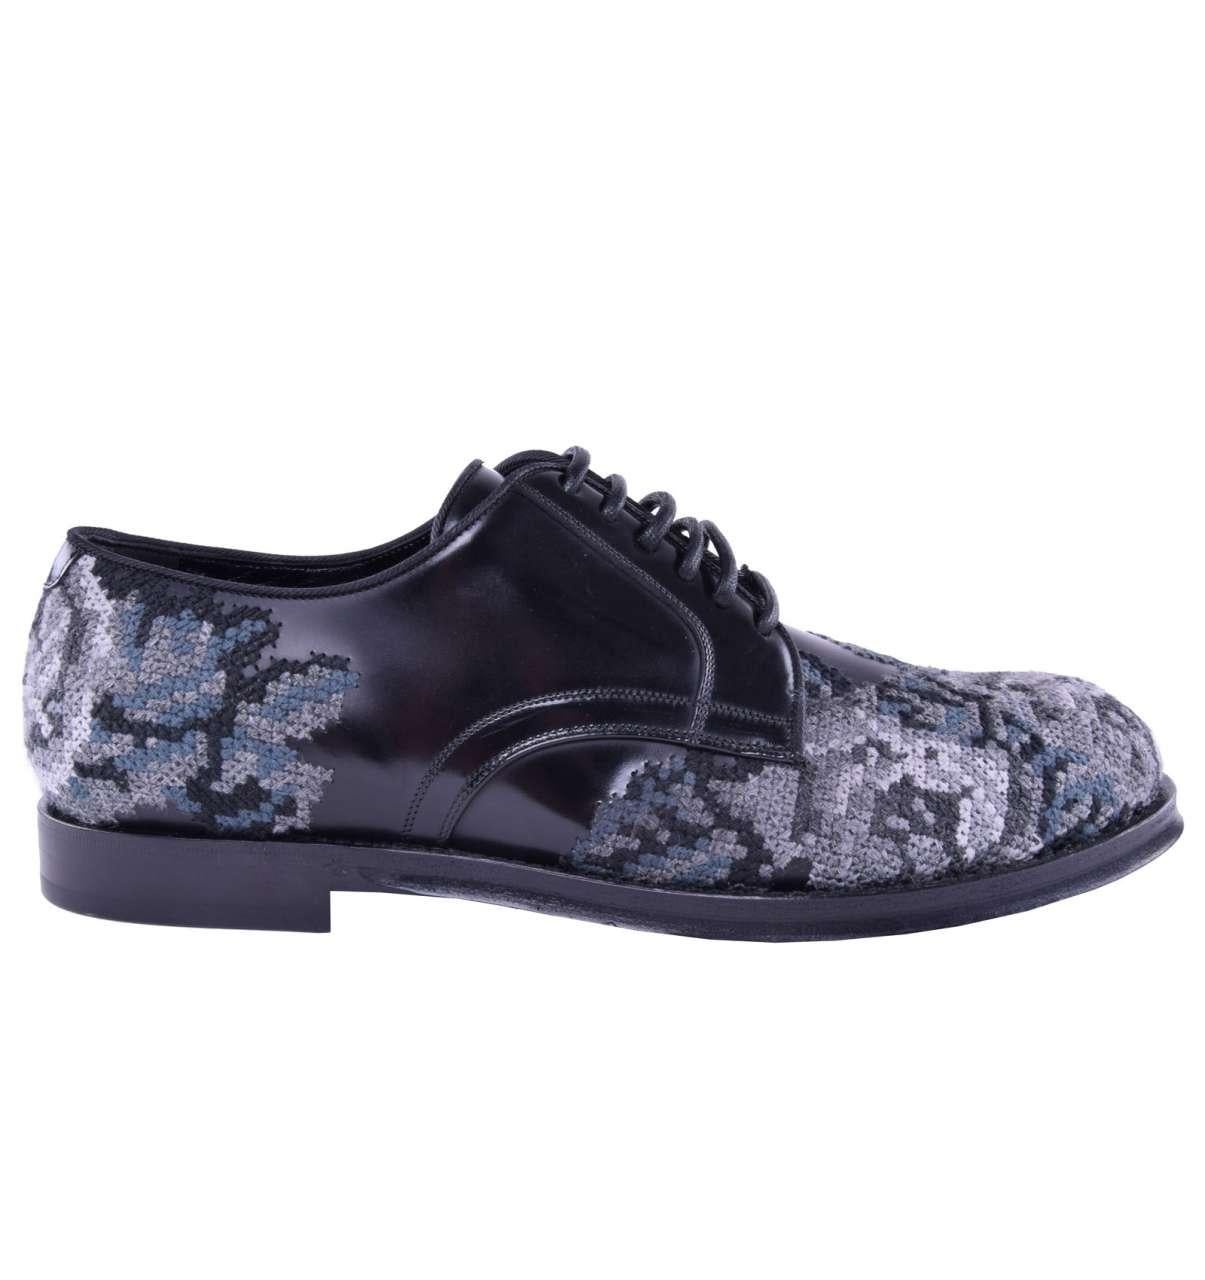 Men's Dolce & Gabbana - RUNWAY Baroque Embroidery Shoes EUR 41.5 For Sale